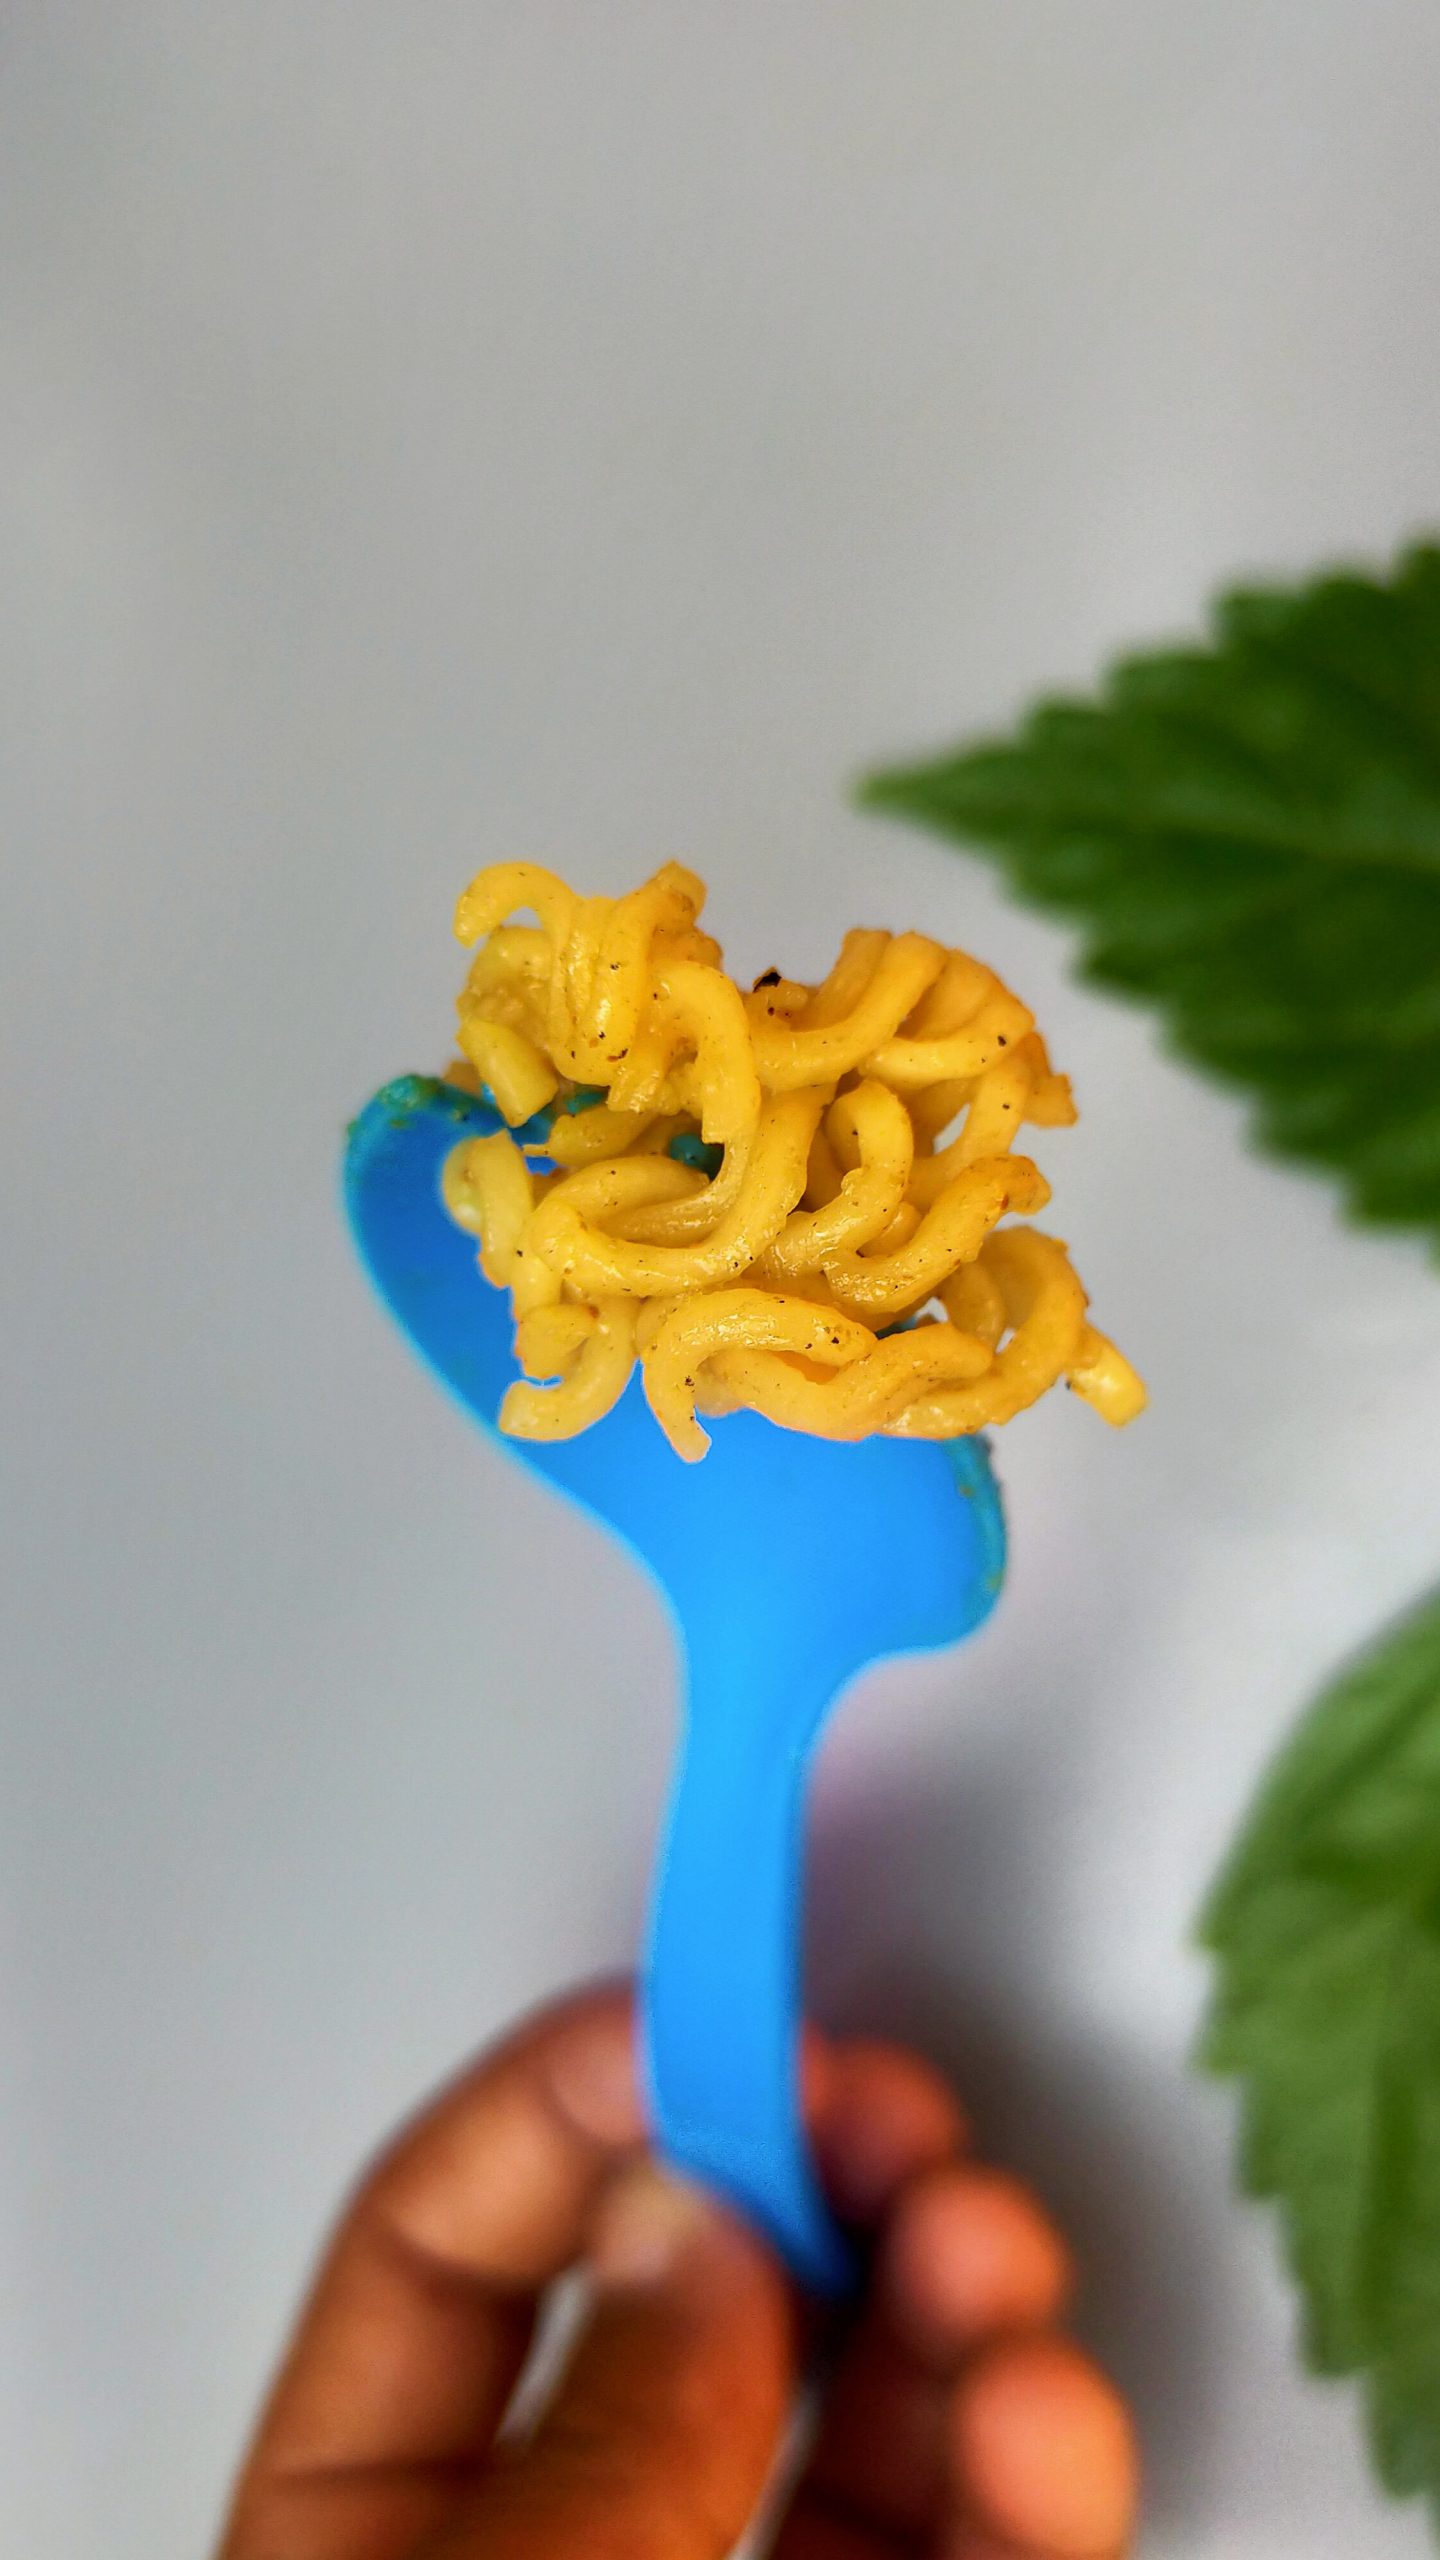 Noodles on a spoon